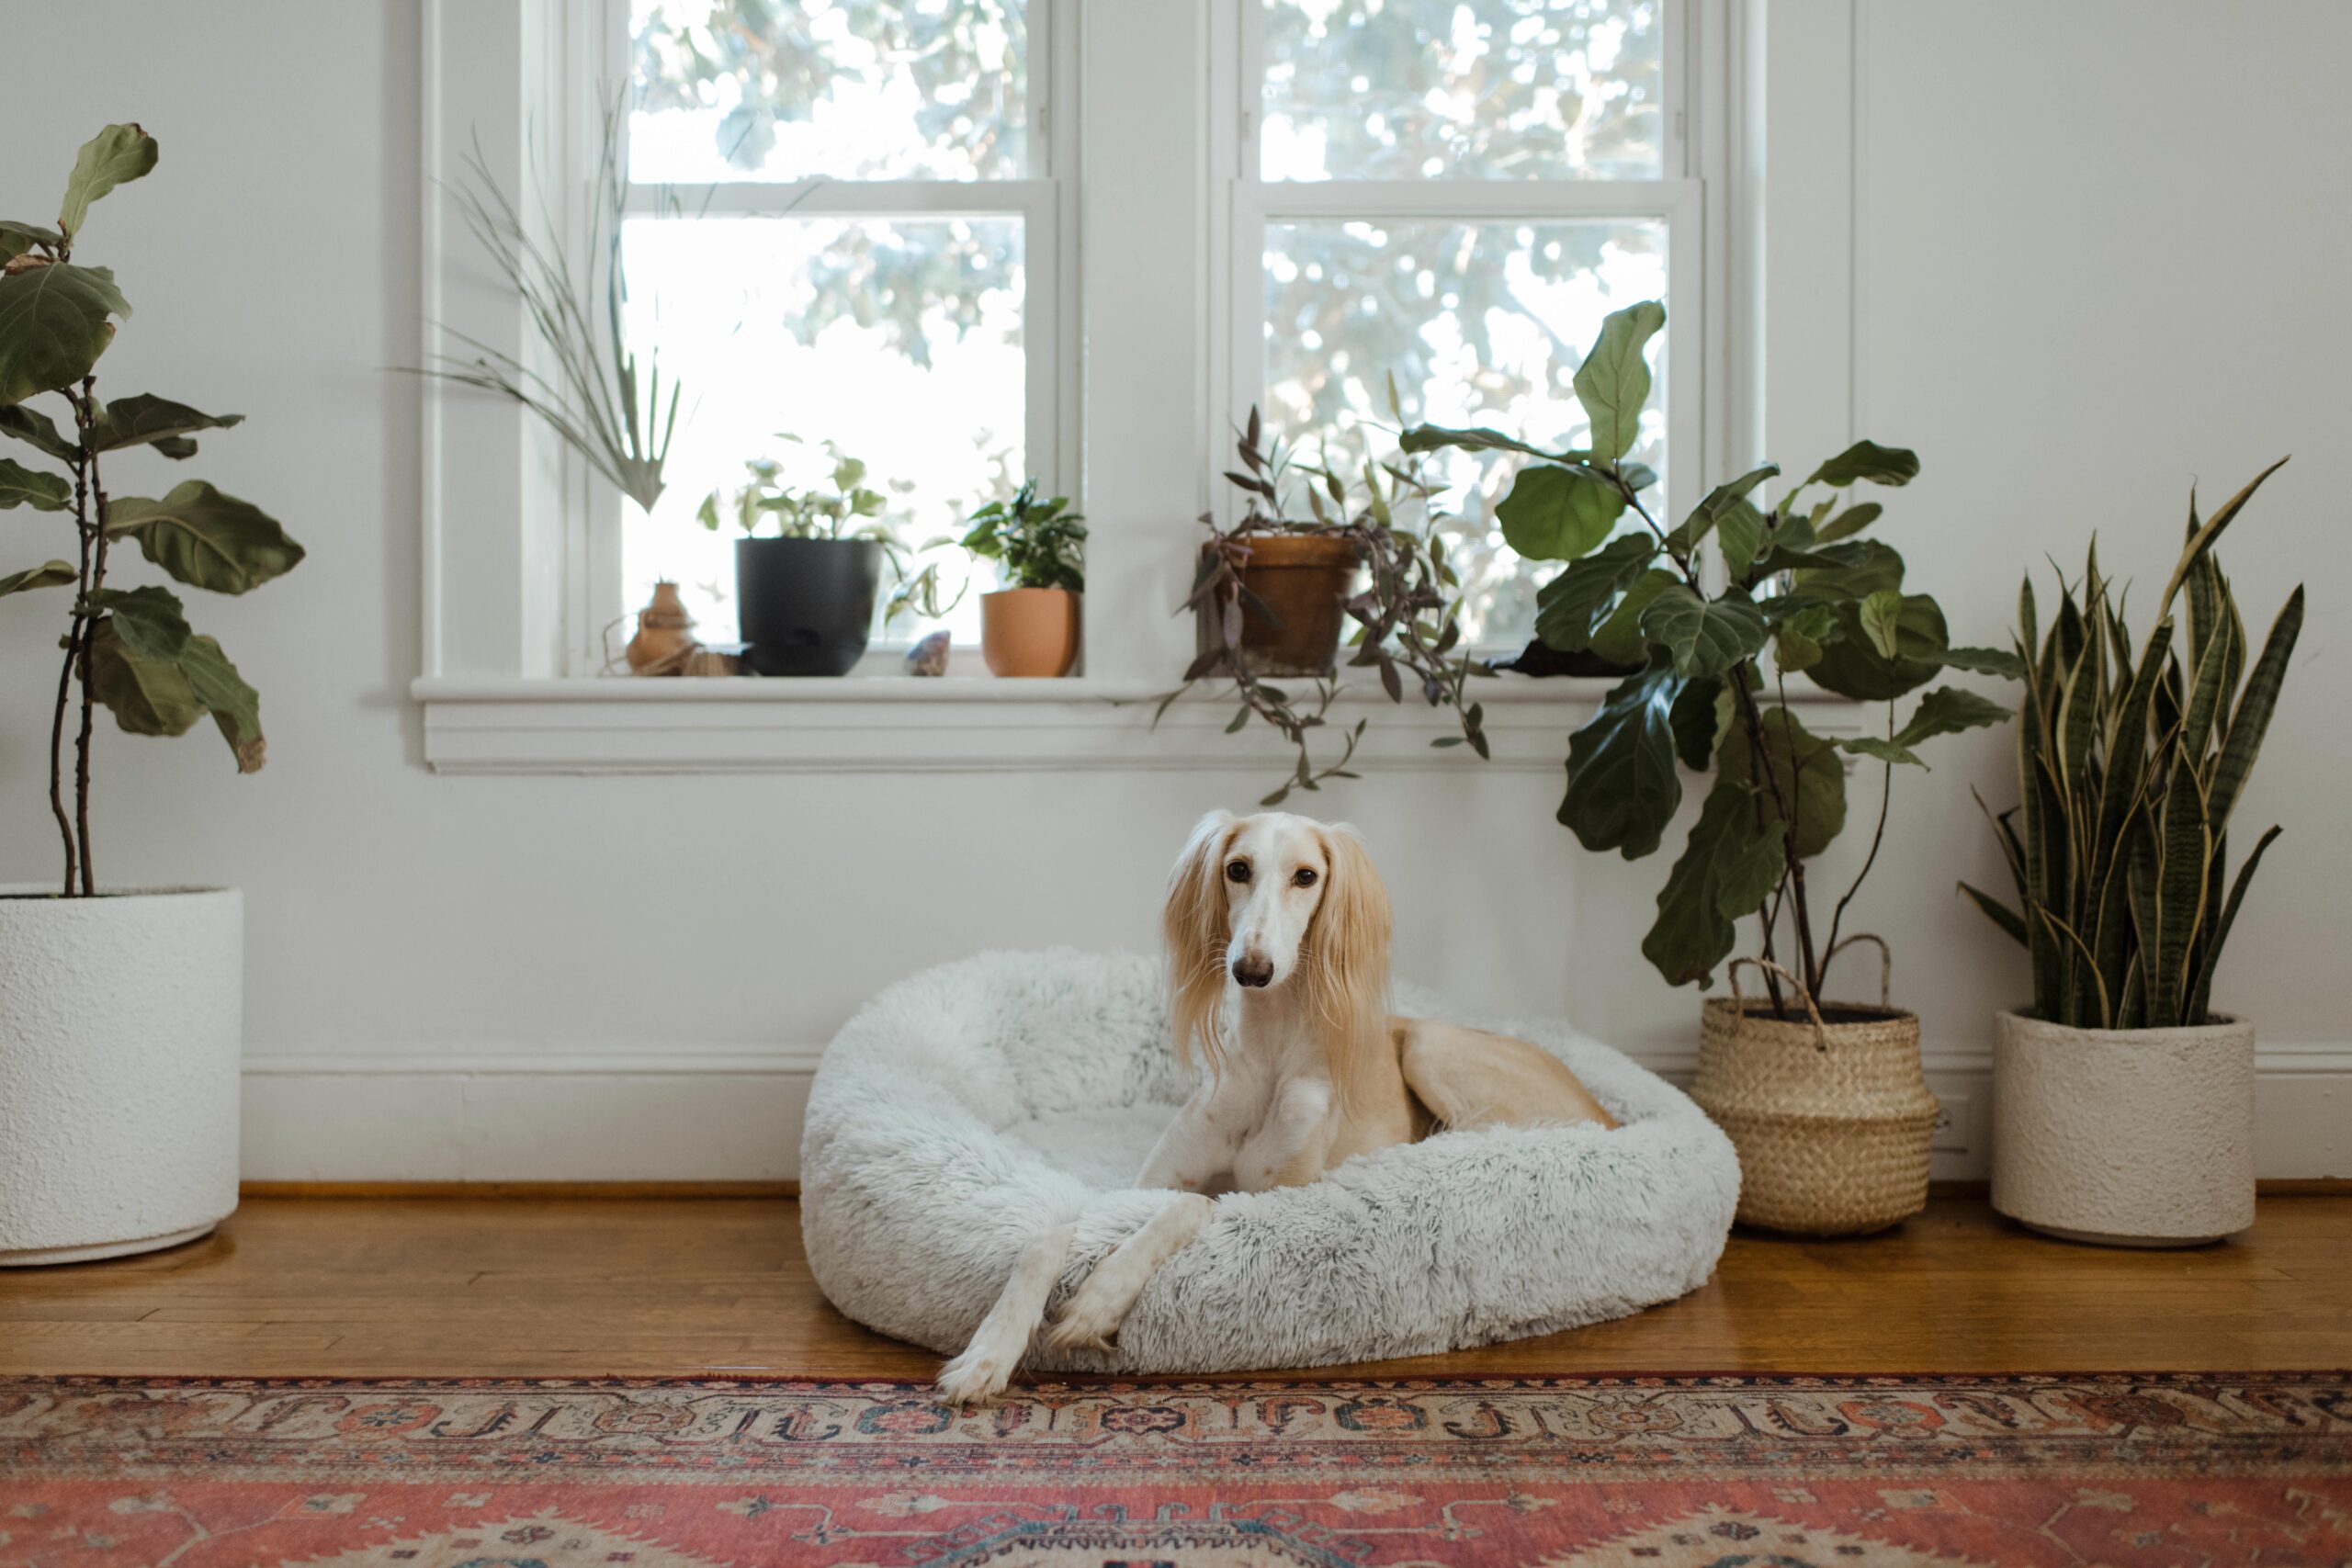 Designing a Pet-Friendly Garden with Non-Toxic Plants